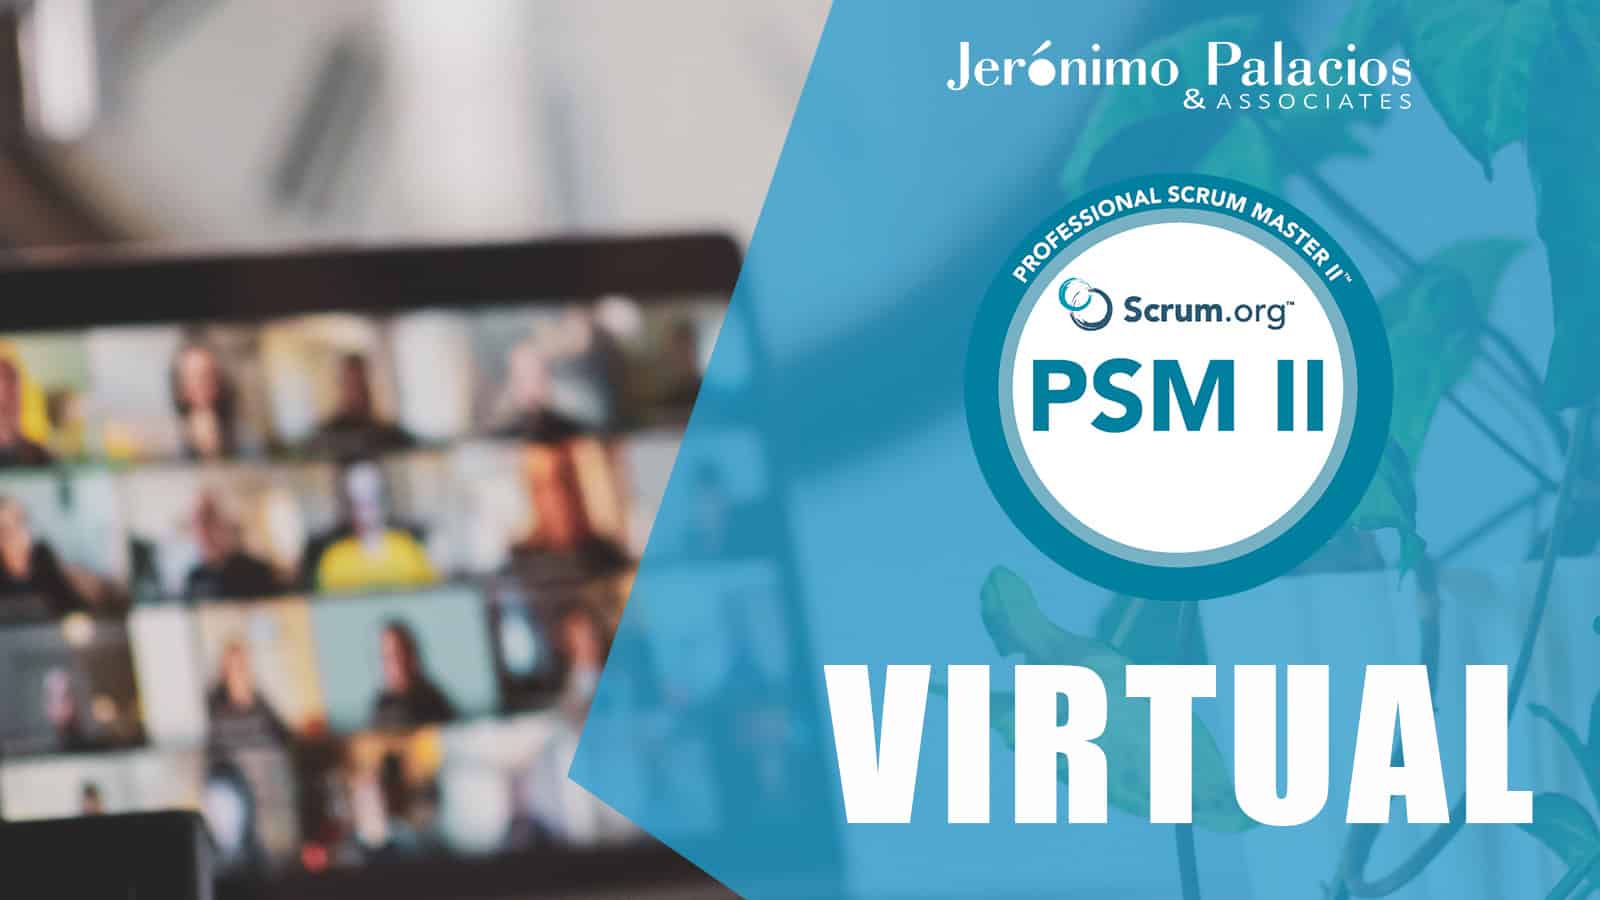 Featured image of the virtual Professional Scrum master course